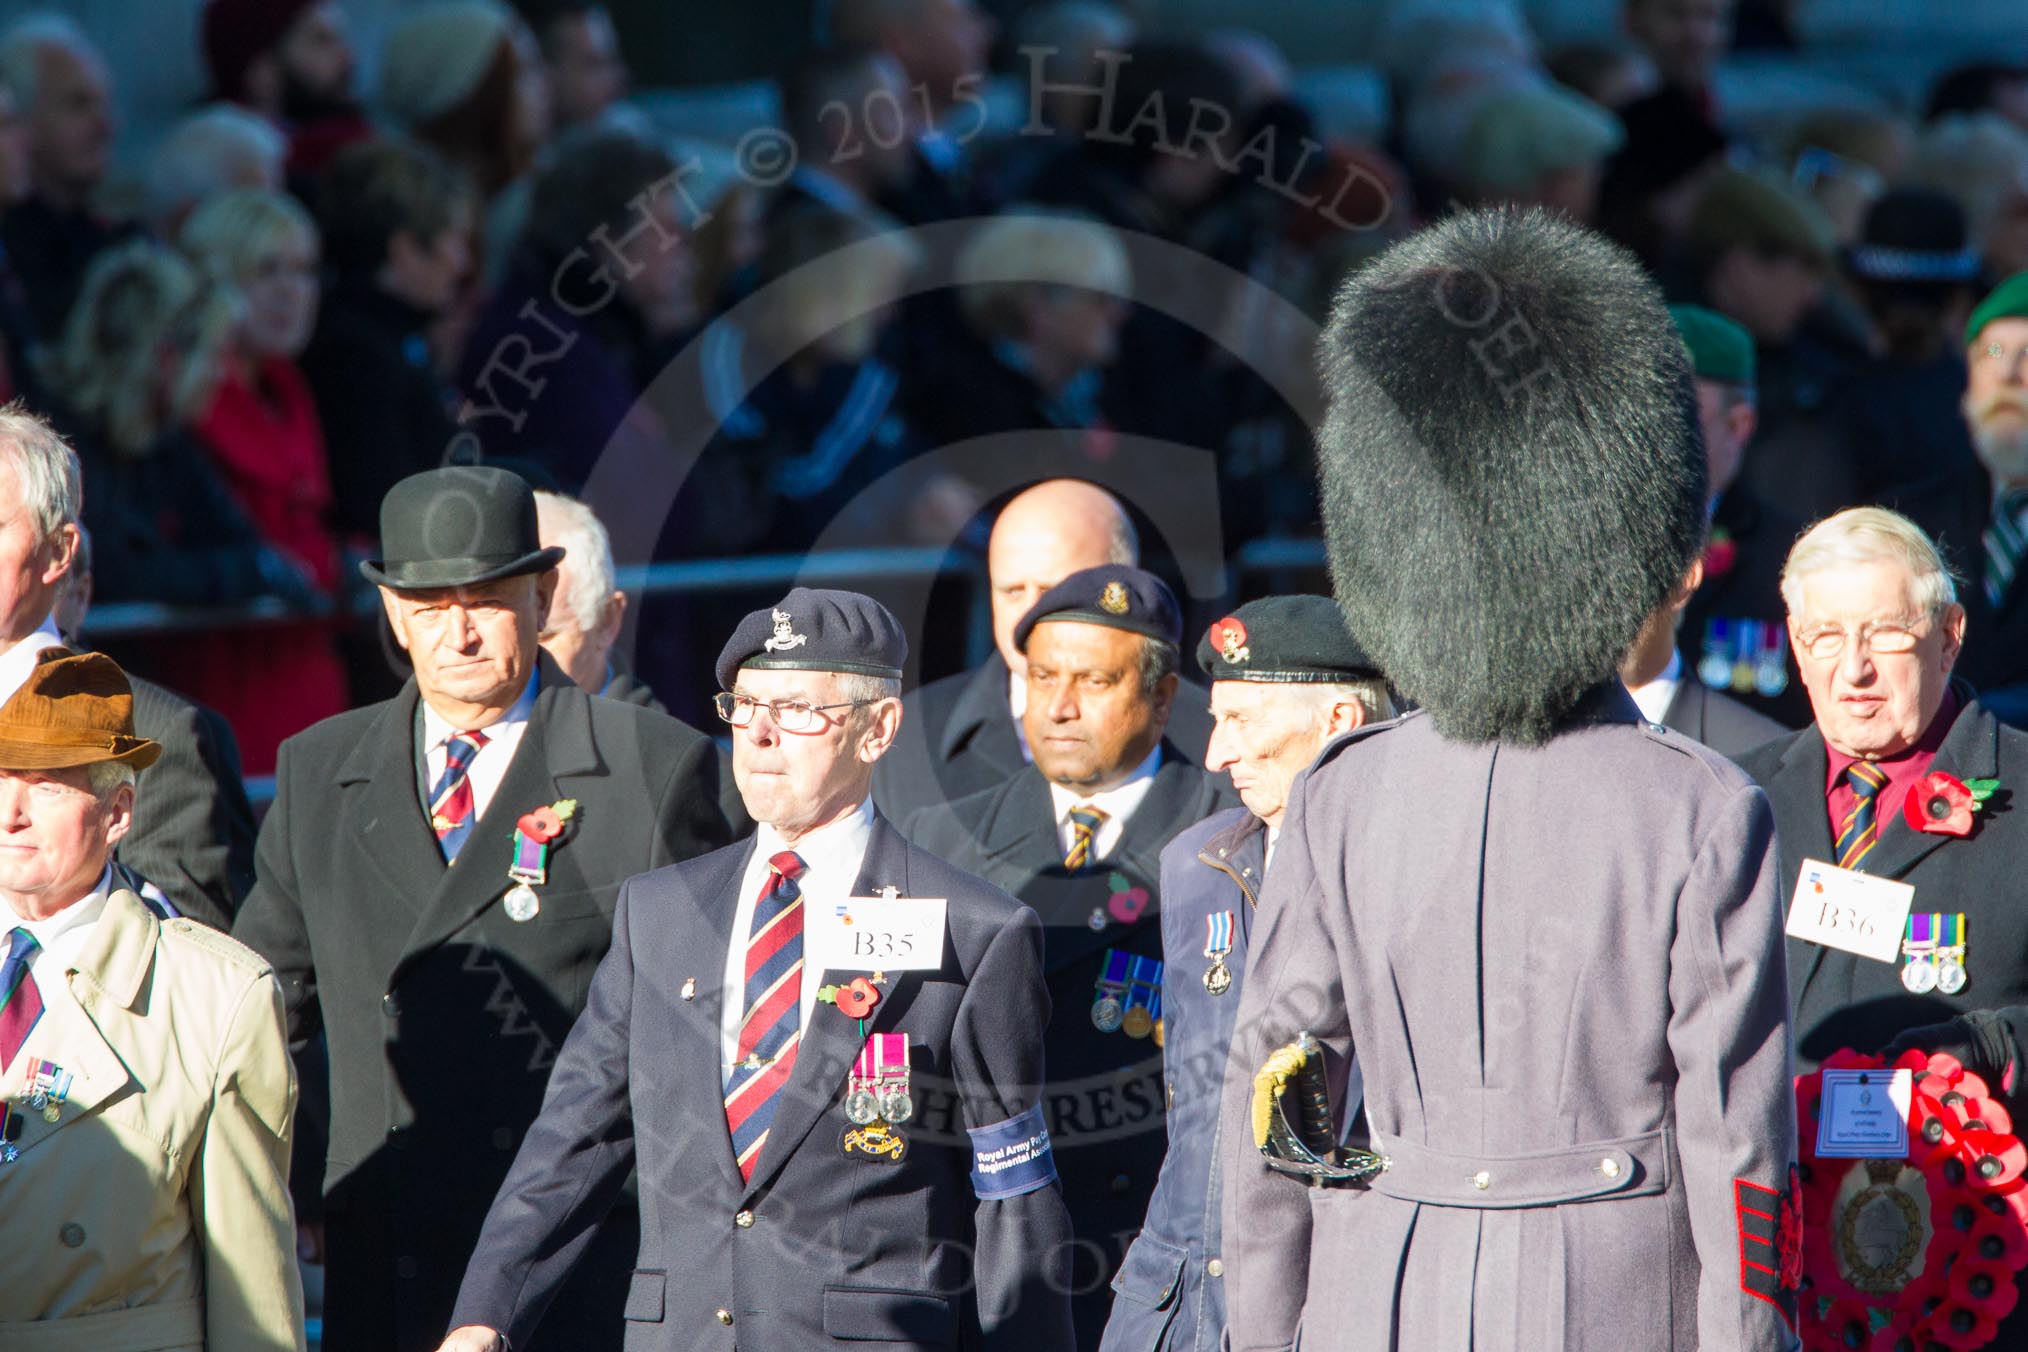 Remembrance Sunday Cenotaph March Past 2013: B35 - Royal Army Pay Corps Regimental Association..
Press stand opposite the Foreign Office building, Whitehall, London SW1,
London,
Greater London,
United Kingdom,
on 10 November 2013 at 12:04, image #1606